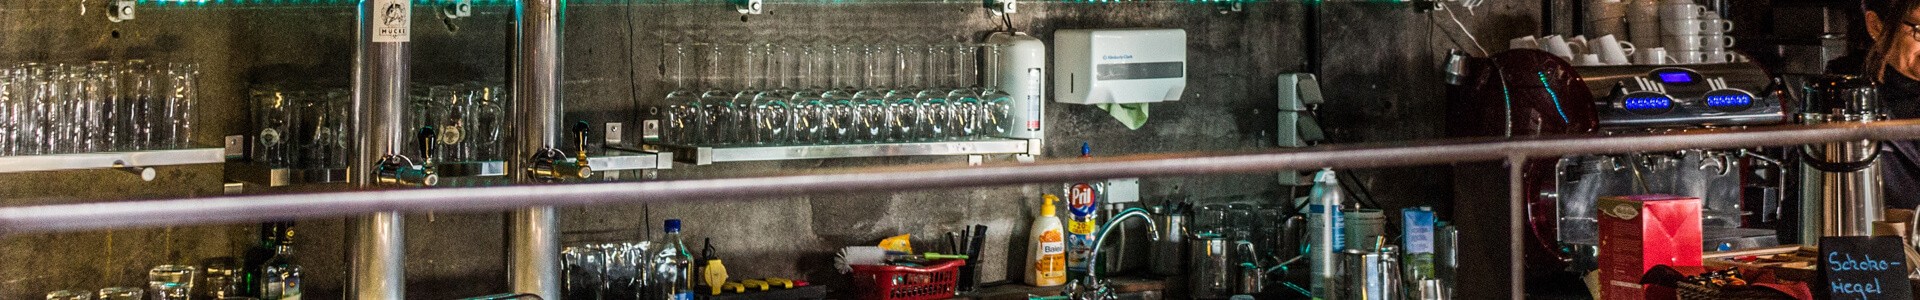 Glasses, sink and dishes behind the counter of a bar.